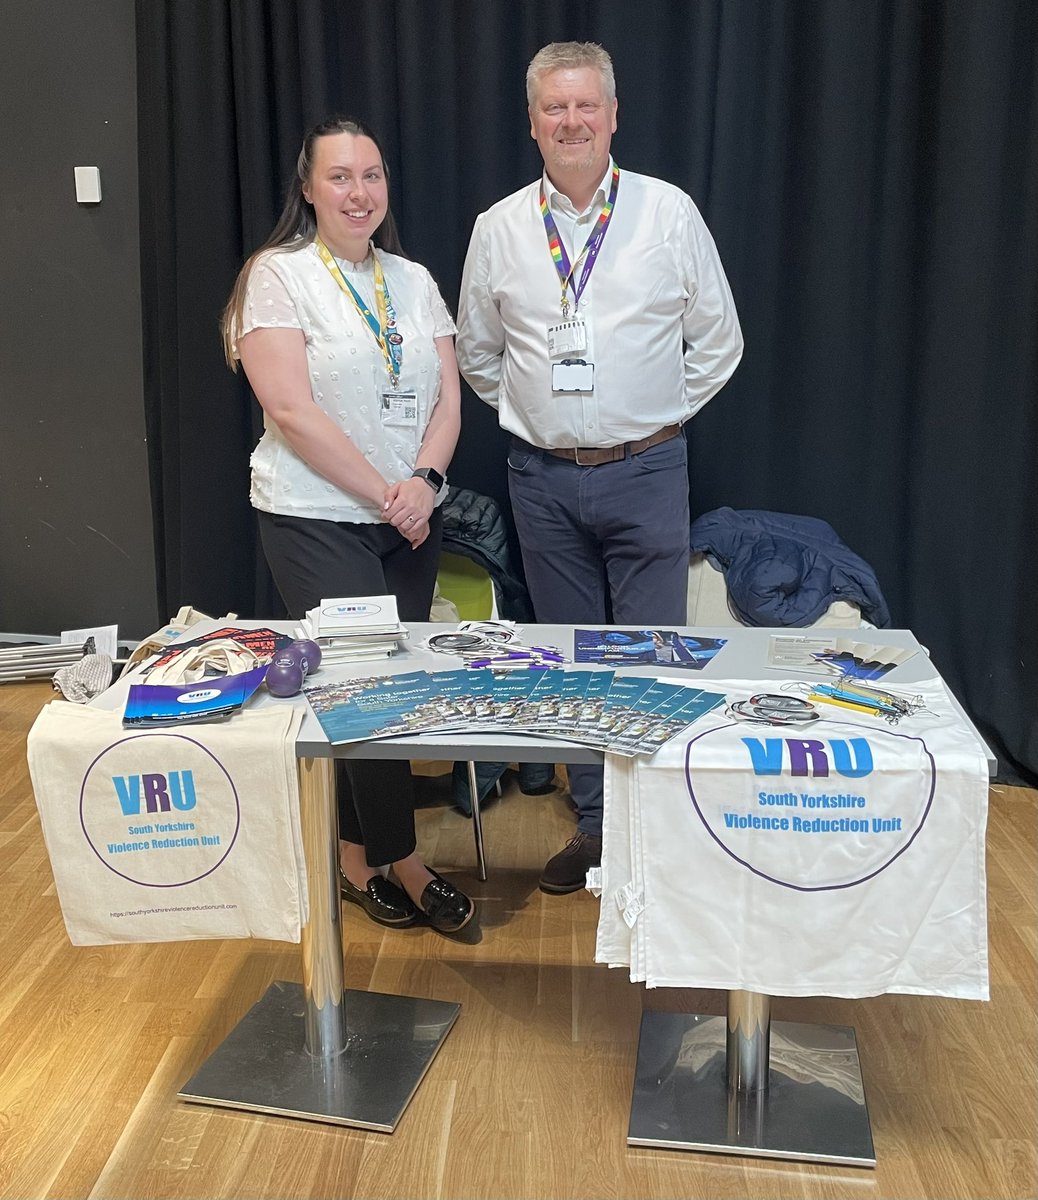 The VRU and the Office of @SYPCC attended @barnsleycollege’s Wellbeing Event. It was fantastic to meet so many staff and students, and great to chat to them about the work we do across South Yorkshire.